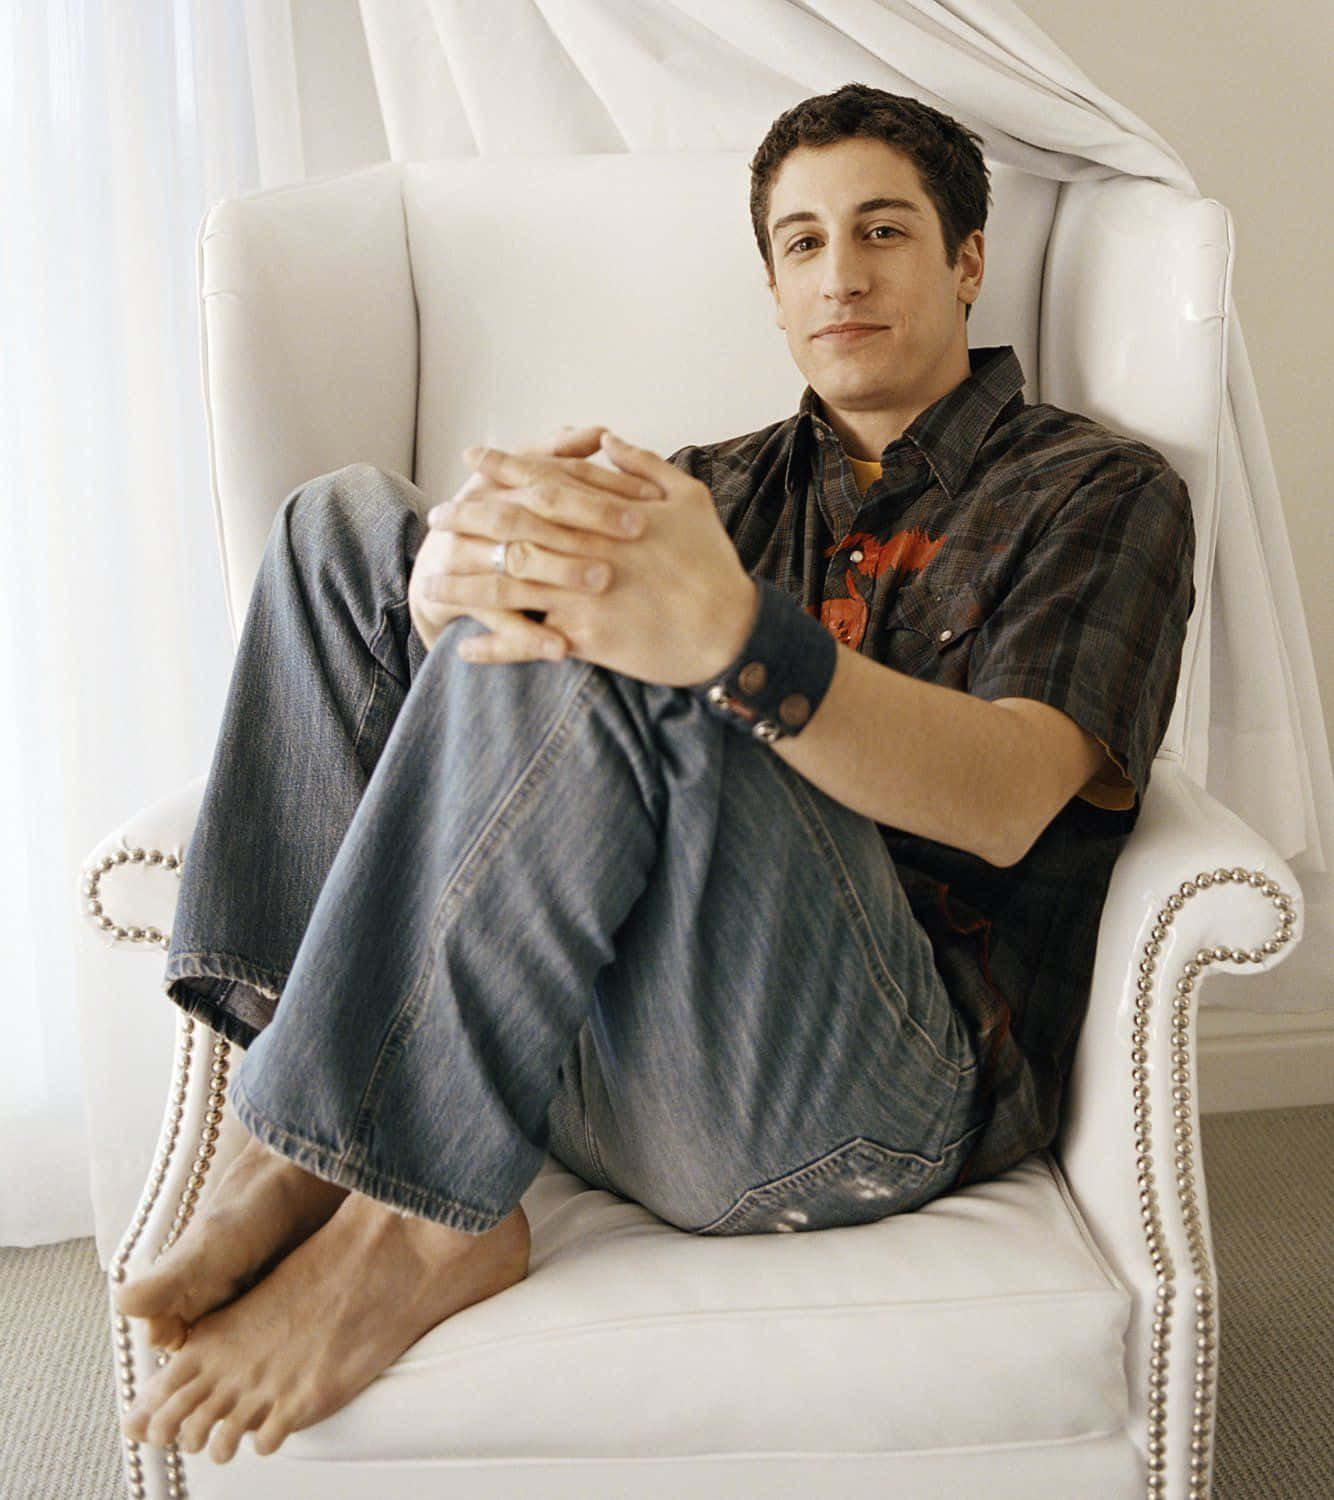 Caption: Actor Jason Biggs poses in a casual style. Wallpaper